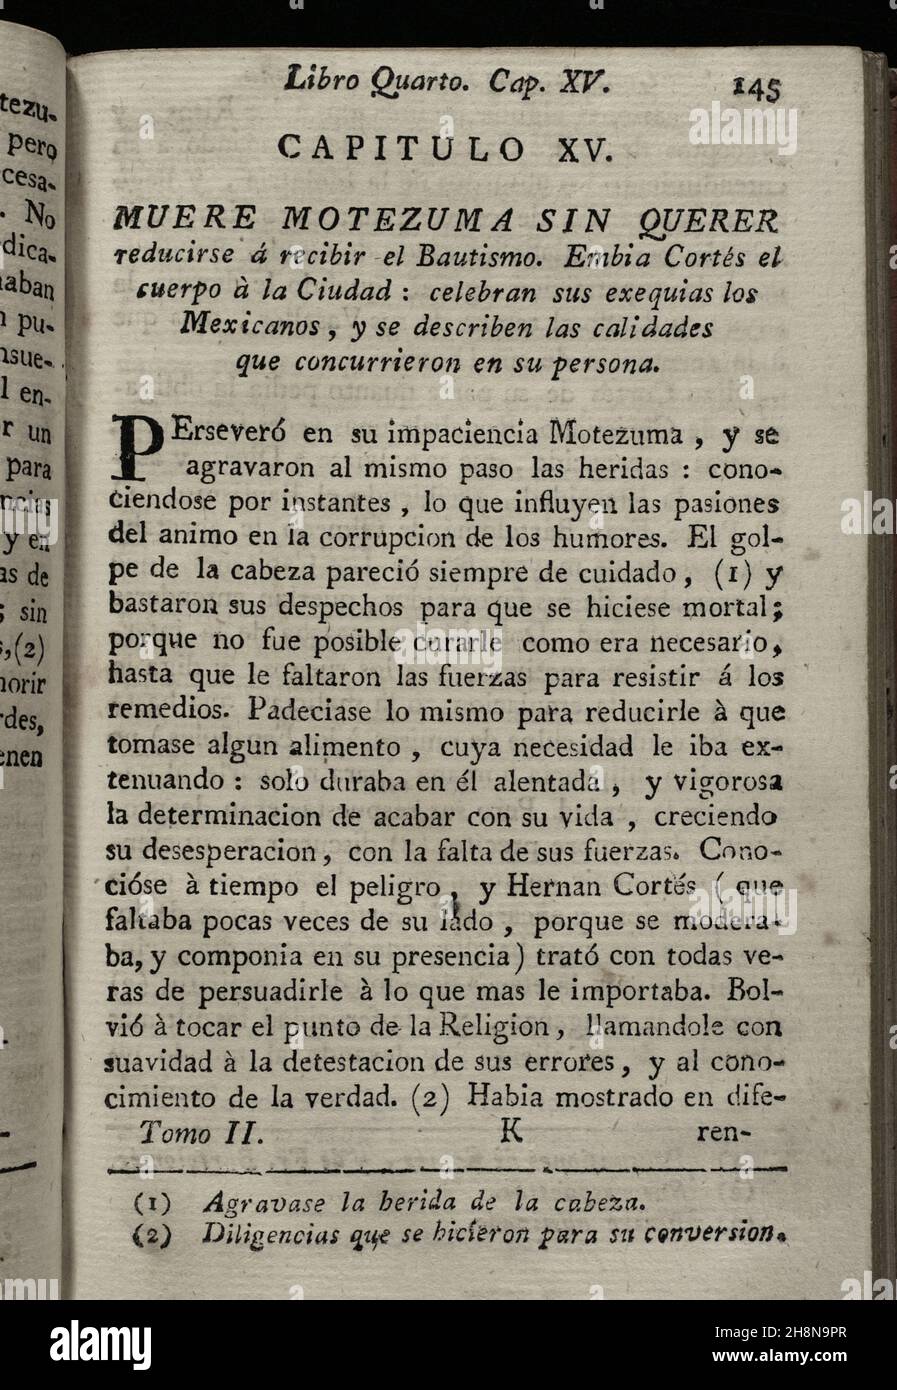 'Moctezuma dies without wanting to be reduced to receive baptism; Cortés sends the body to the city; the Mexicans celebrate his funeral; and the qualities that concurred in his person are described'. 'Historia de la Conquista de México, población, y progresos de la América septentrional, conocida por el nombre de Nueva España' (History of the Conquest of Mexico, population, and progress of northern America, known by the name of New Spain). Written by Antonio de Solís y Rivadeneryra (1610-1686), Chronicler of the Indies. Volume II. Book IV, Chapter XV. Edition published in Barcelona and divided Stock Photo